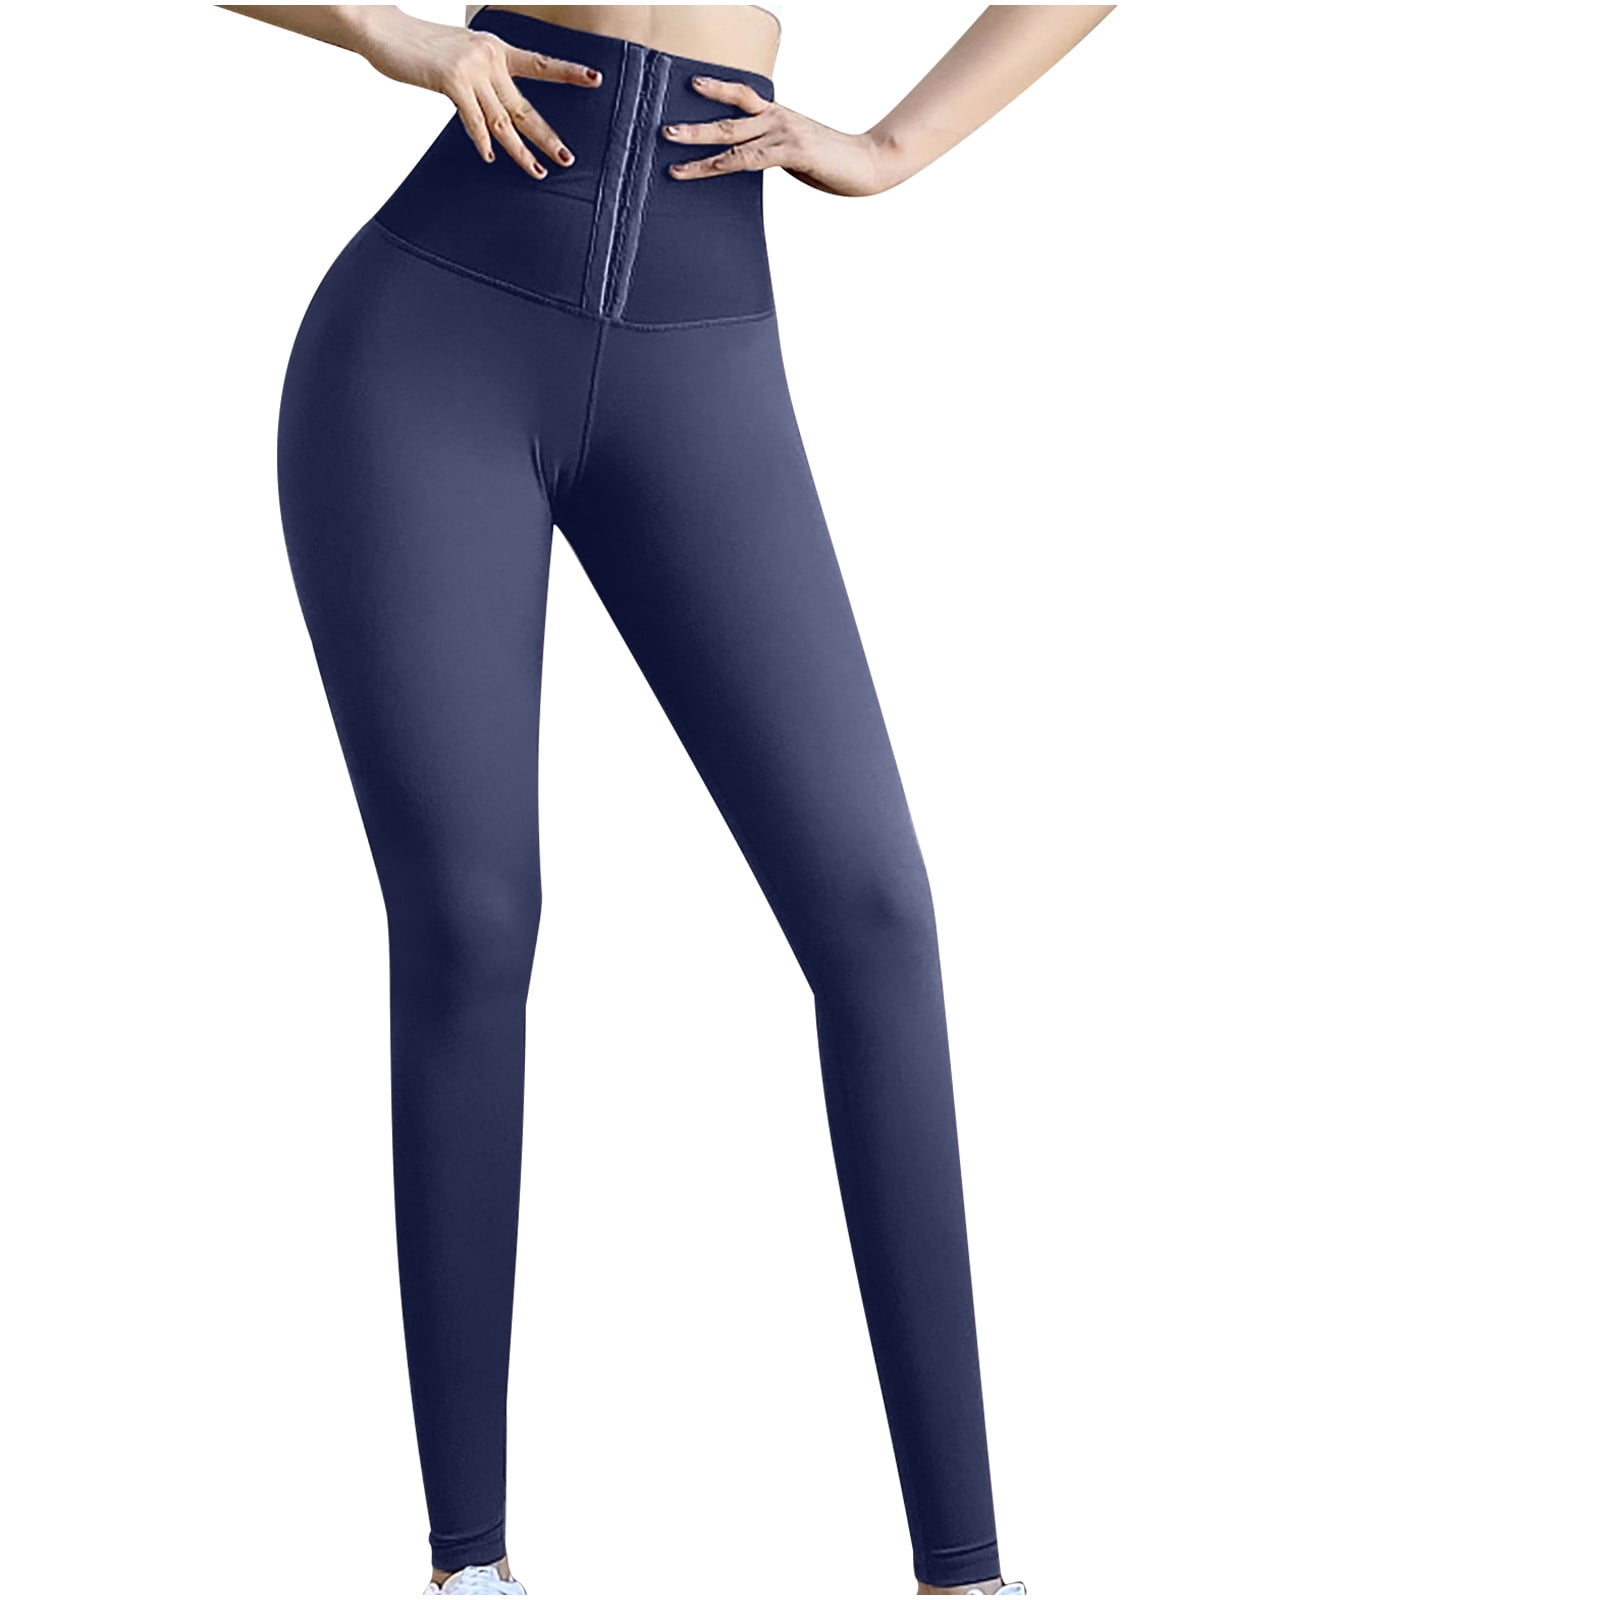 Women's High Waist Yoga Legging, Best Yoga, Sports, Workout, Running & Training  Pants for Sale at the Lowest Prices – SHEJOLLY